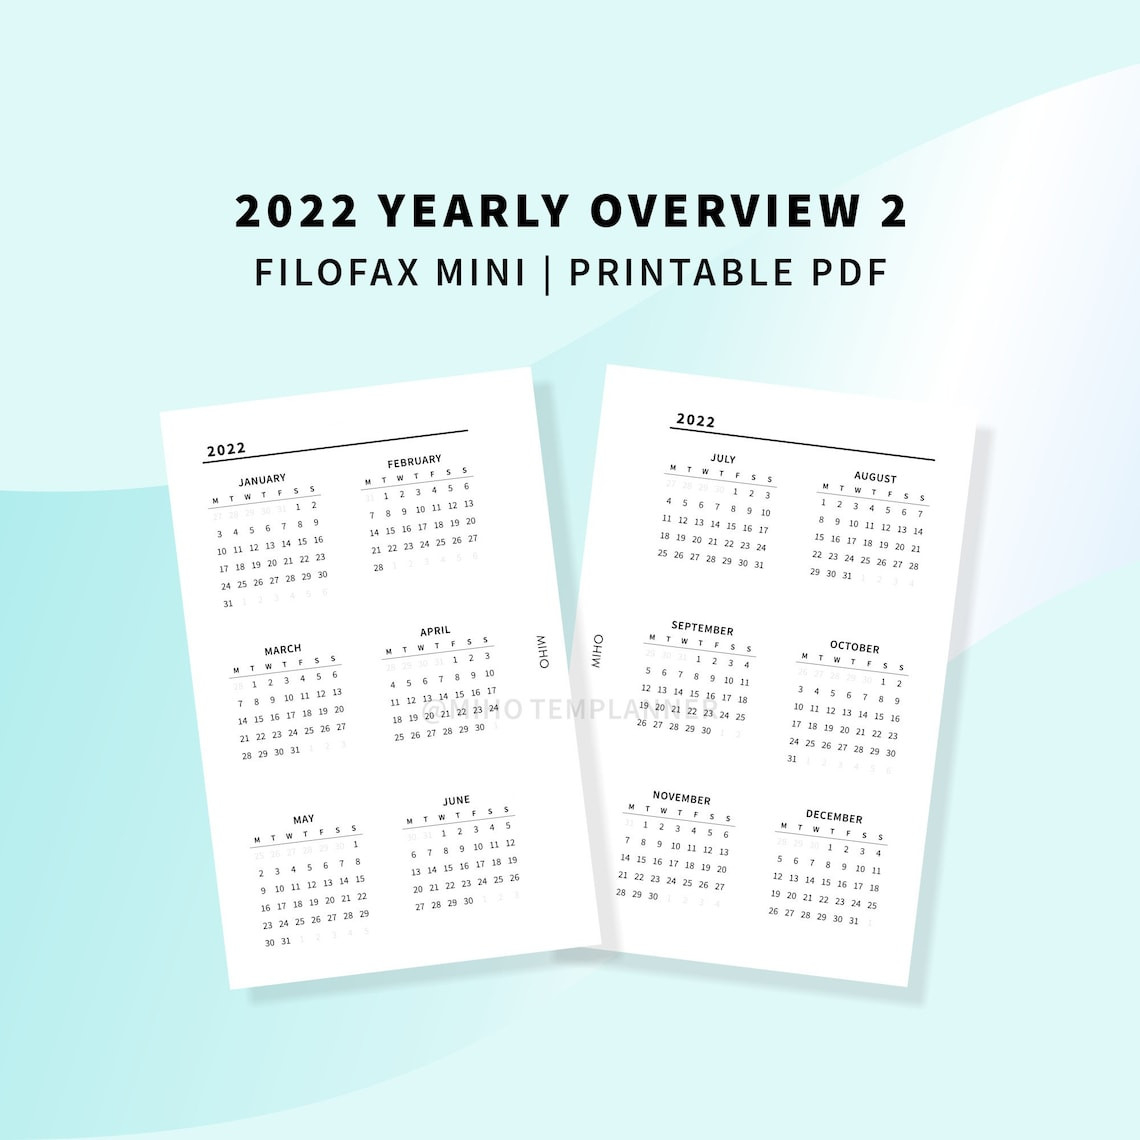 2022 Calendar Printable Year At A Glance Yearly Overview  Free Printable Calendar 2022 Small